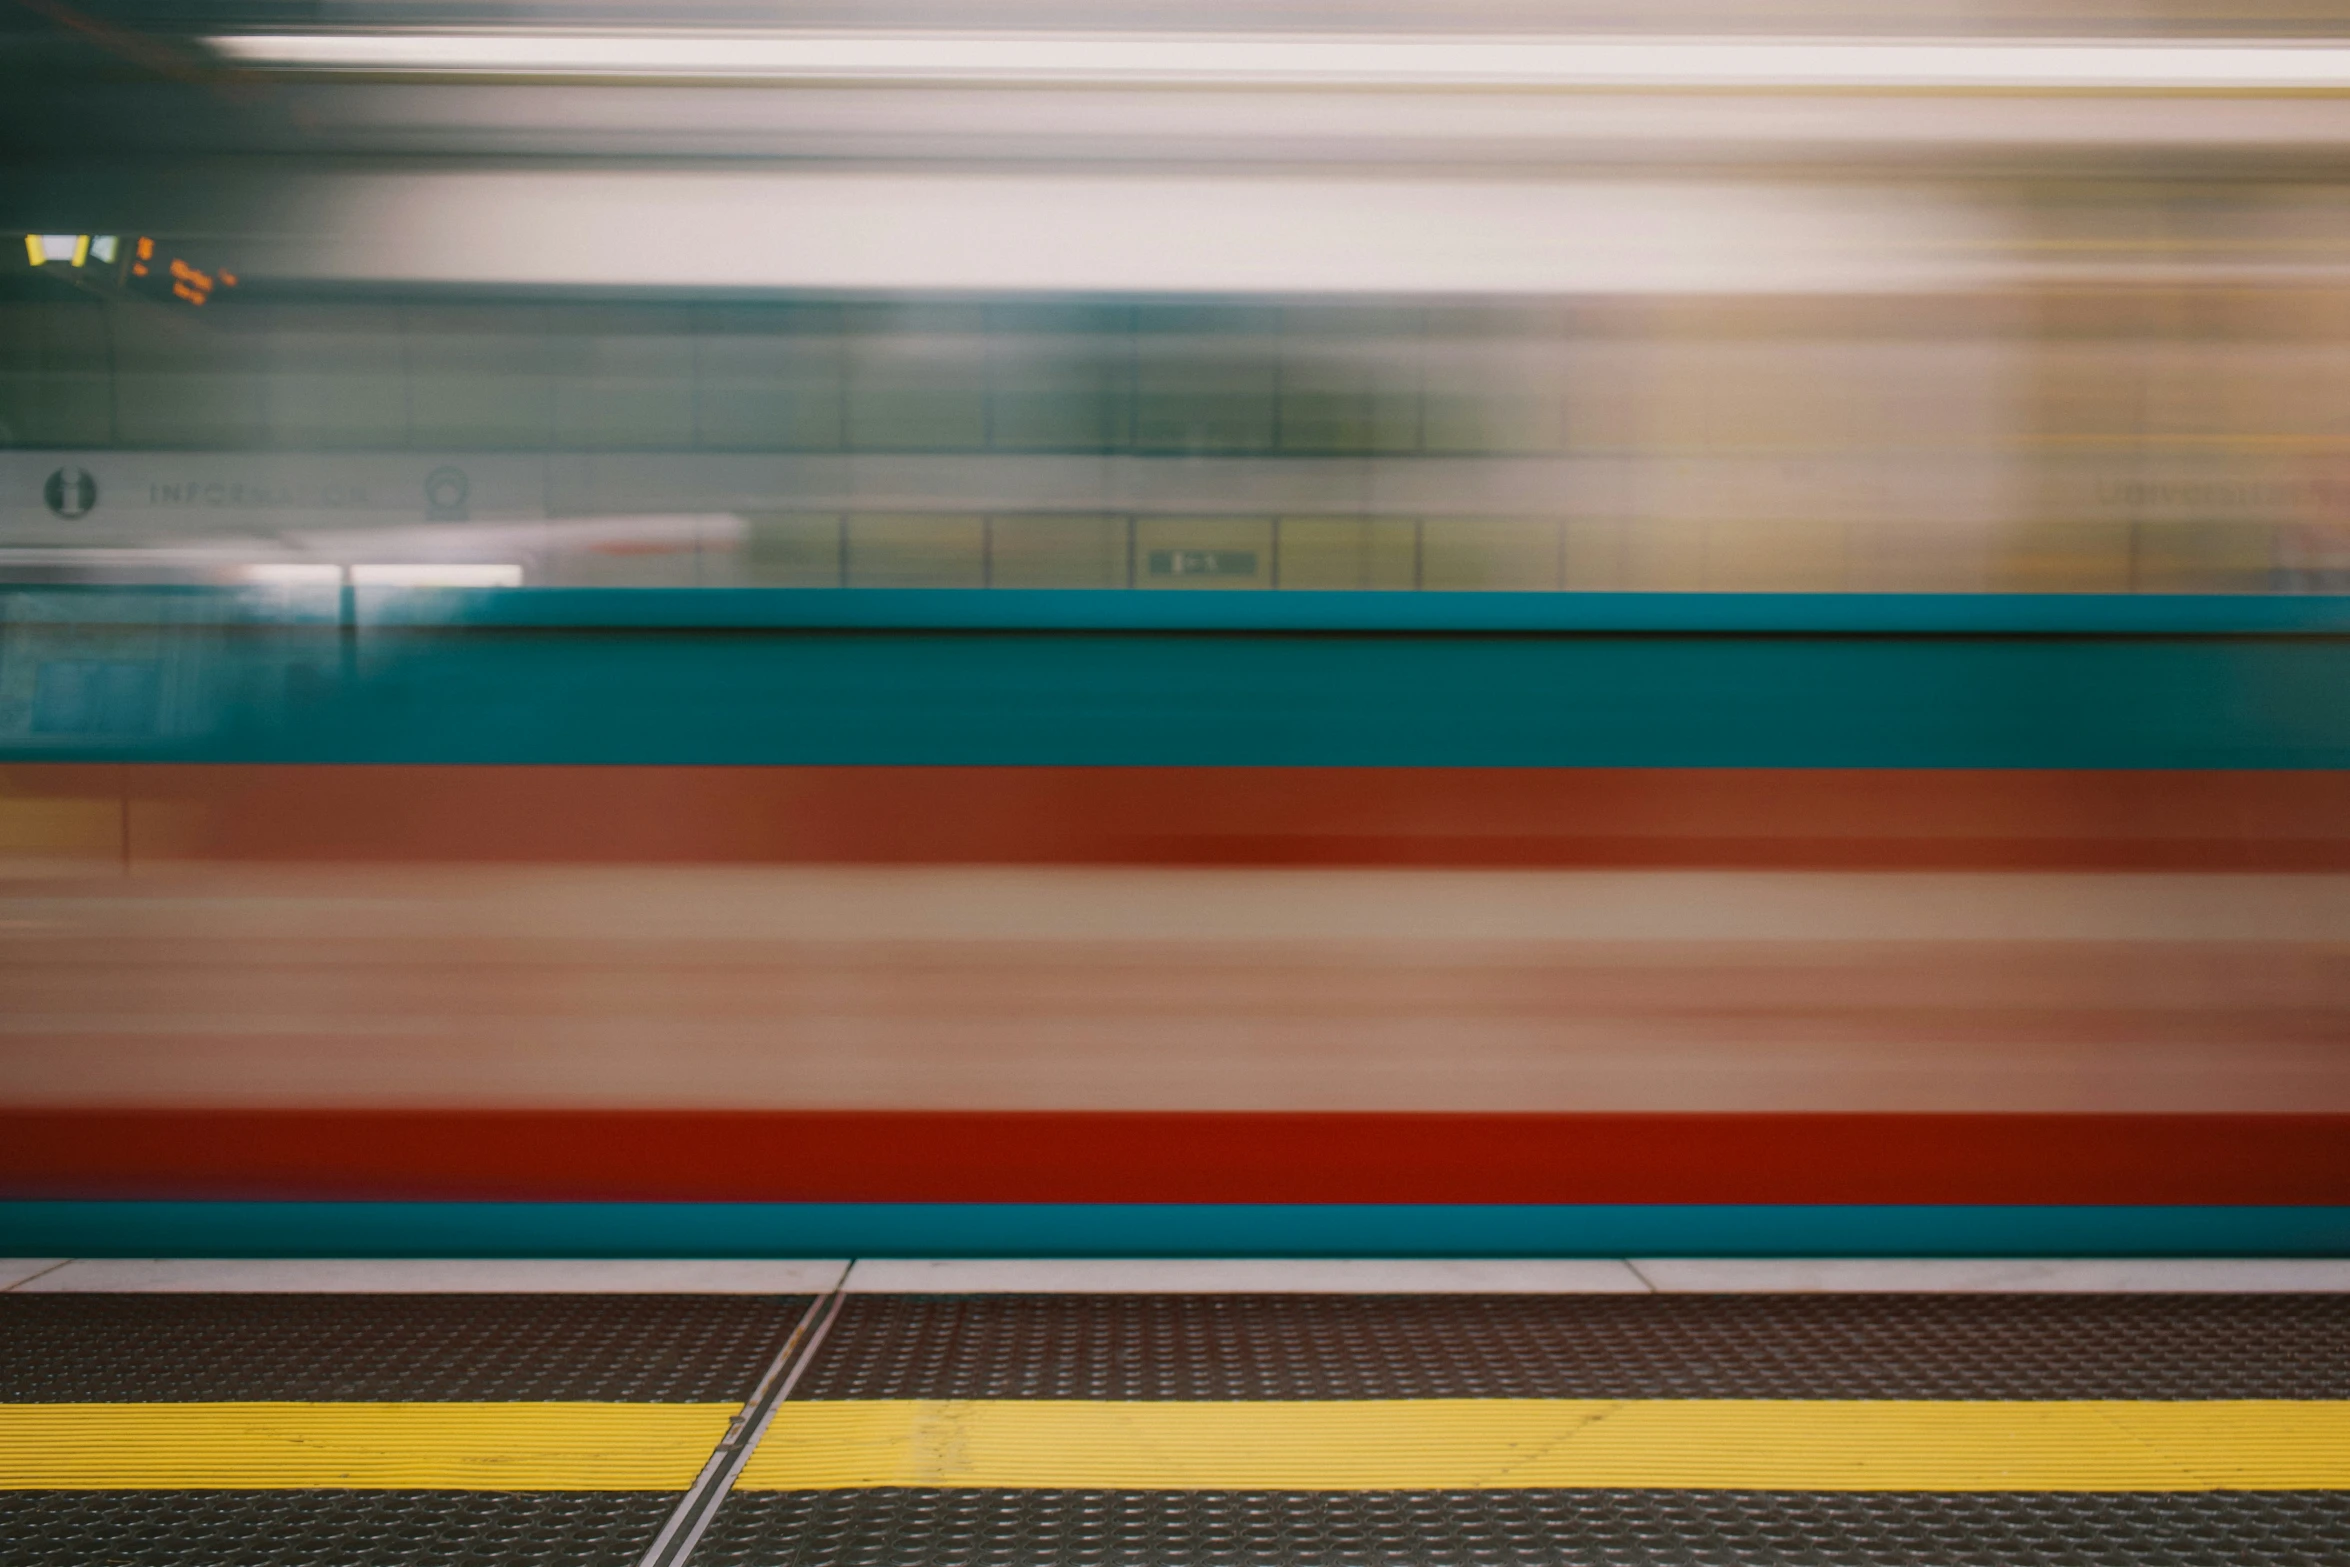 blurred image of a train and its tracks in motion